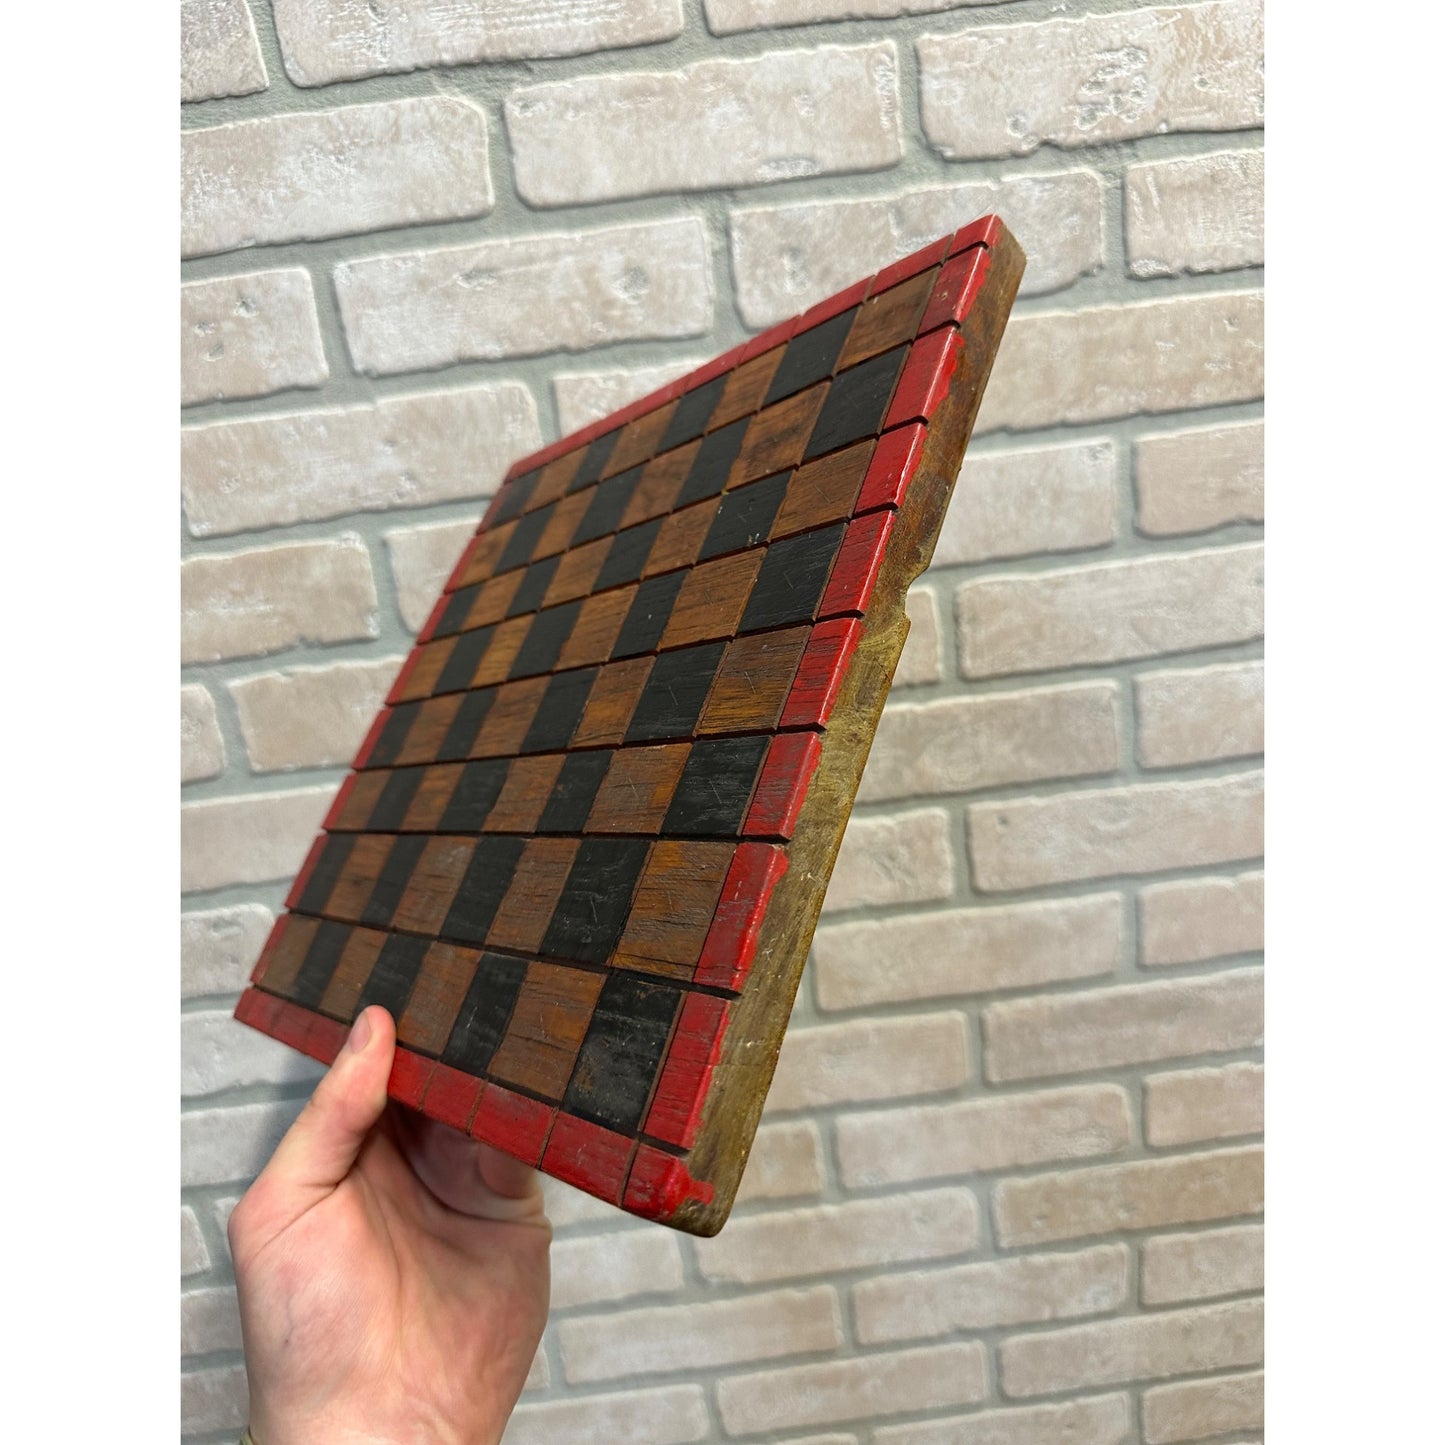 Vintage Handpainted Wooden Chess / Checkers Game Board Primitive Decor 11" x 11"